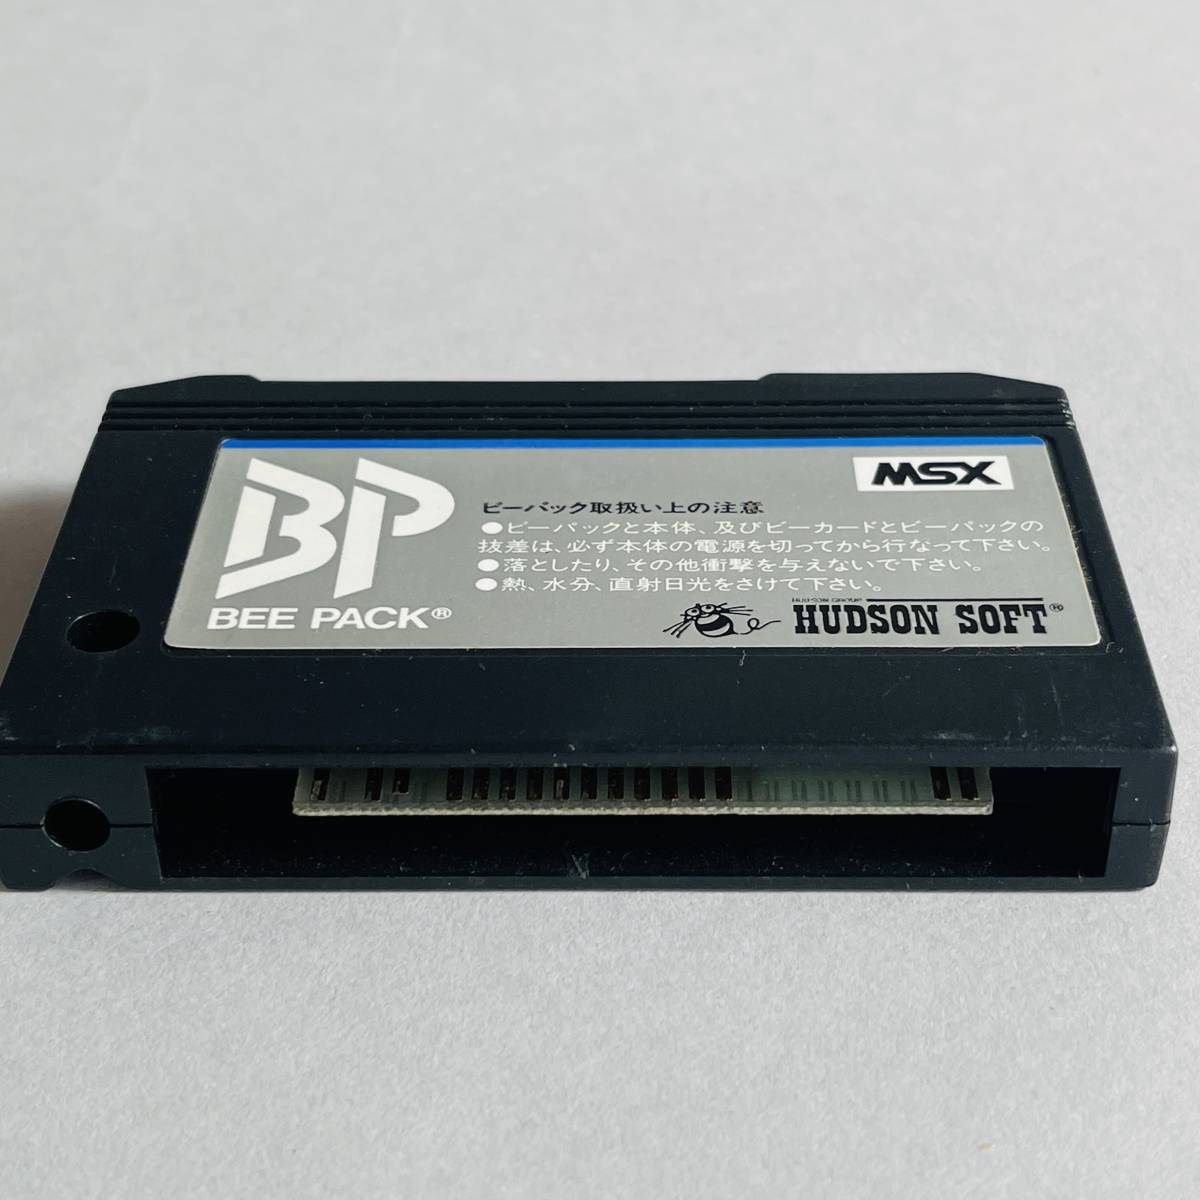 MSX BEE PACK A11 ビーカード用カートリッジ BEE CARD ハドソン ソフトの画像7